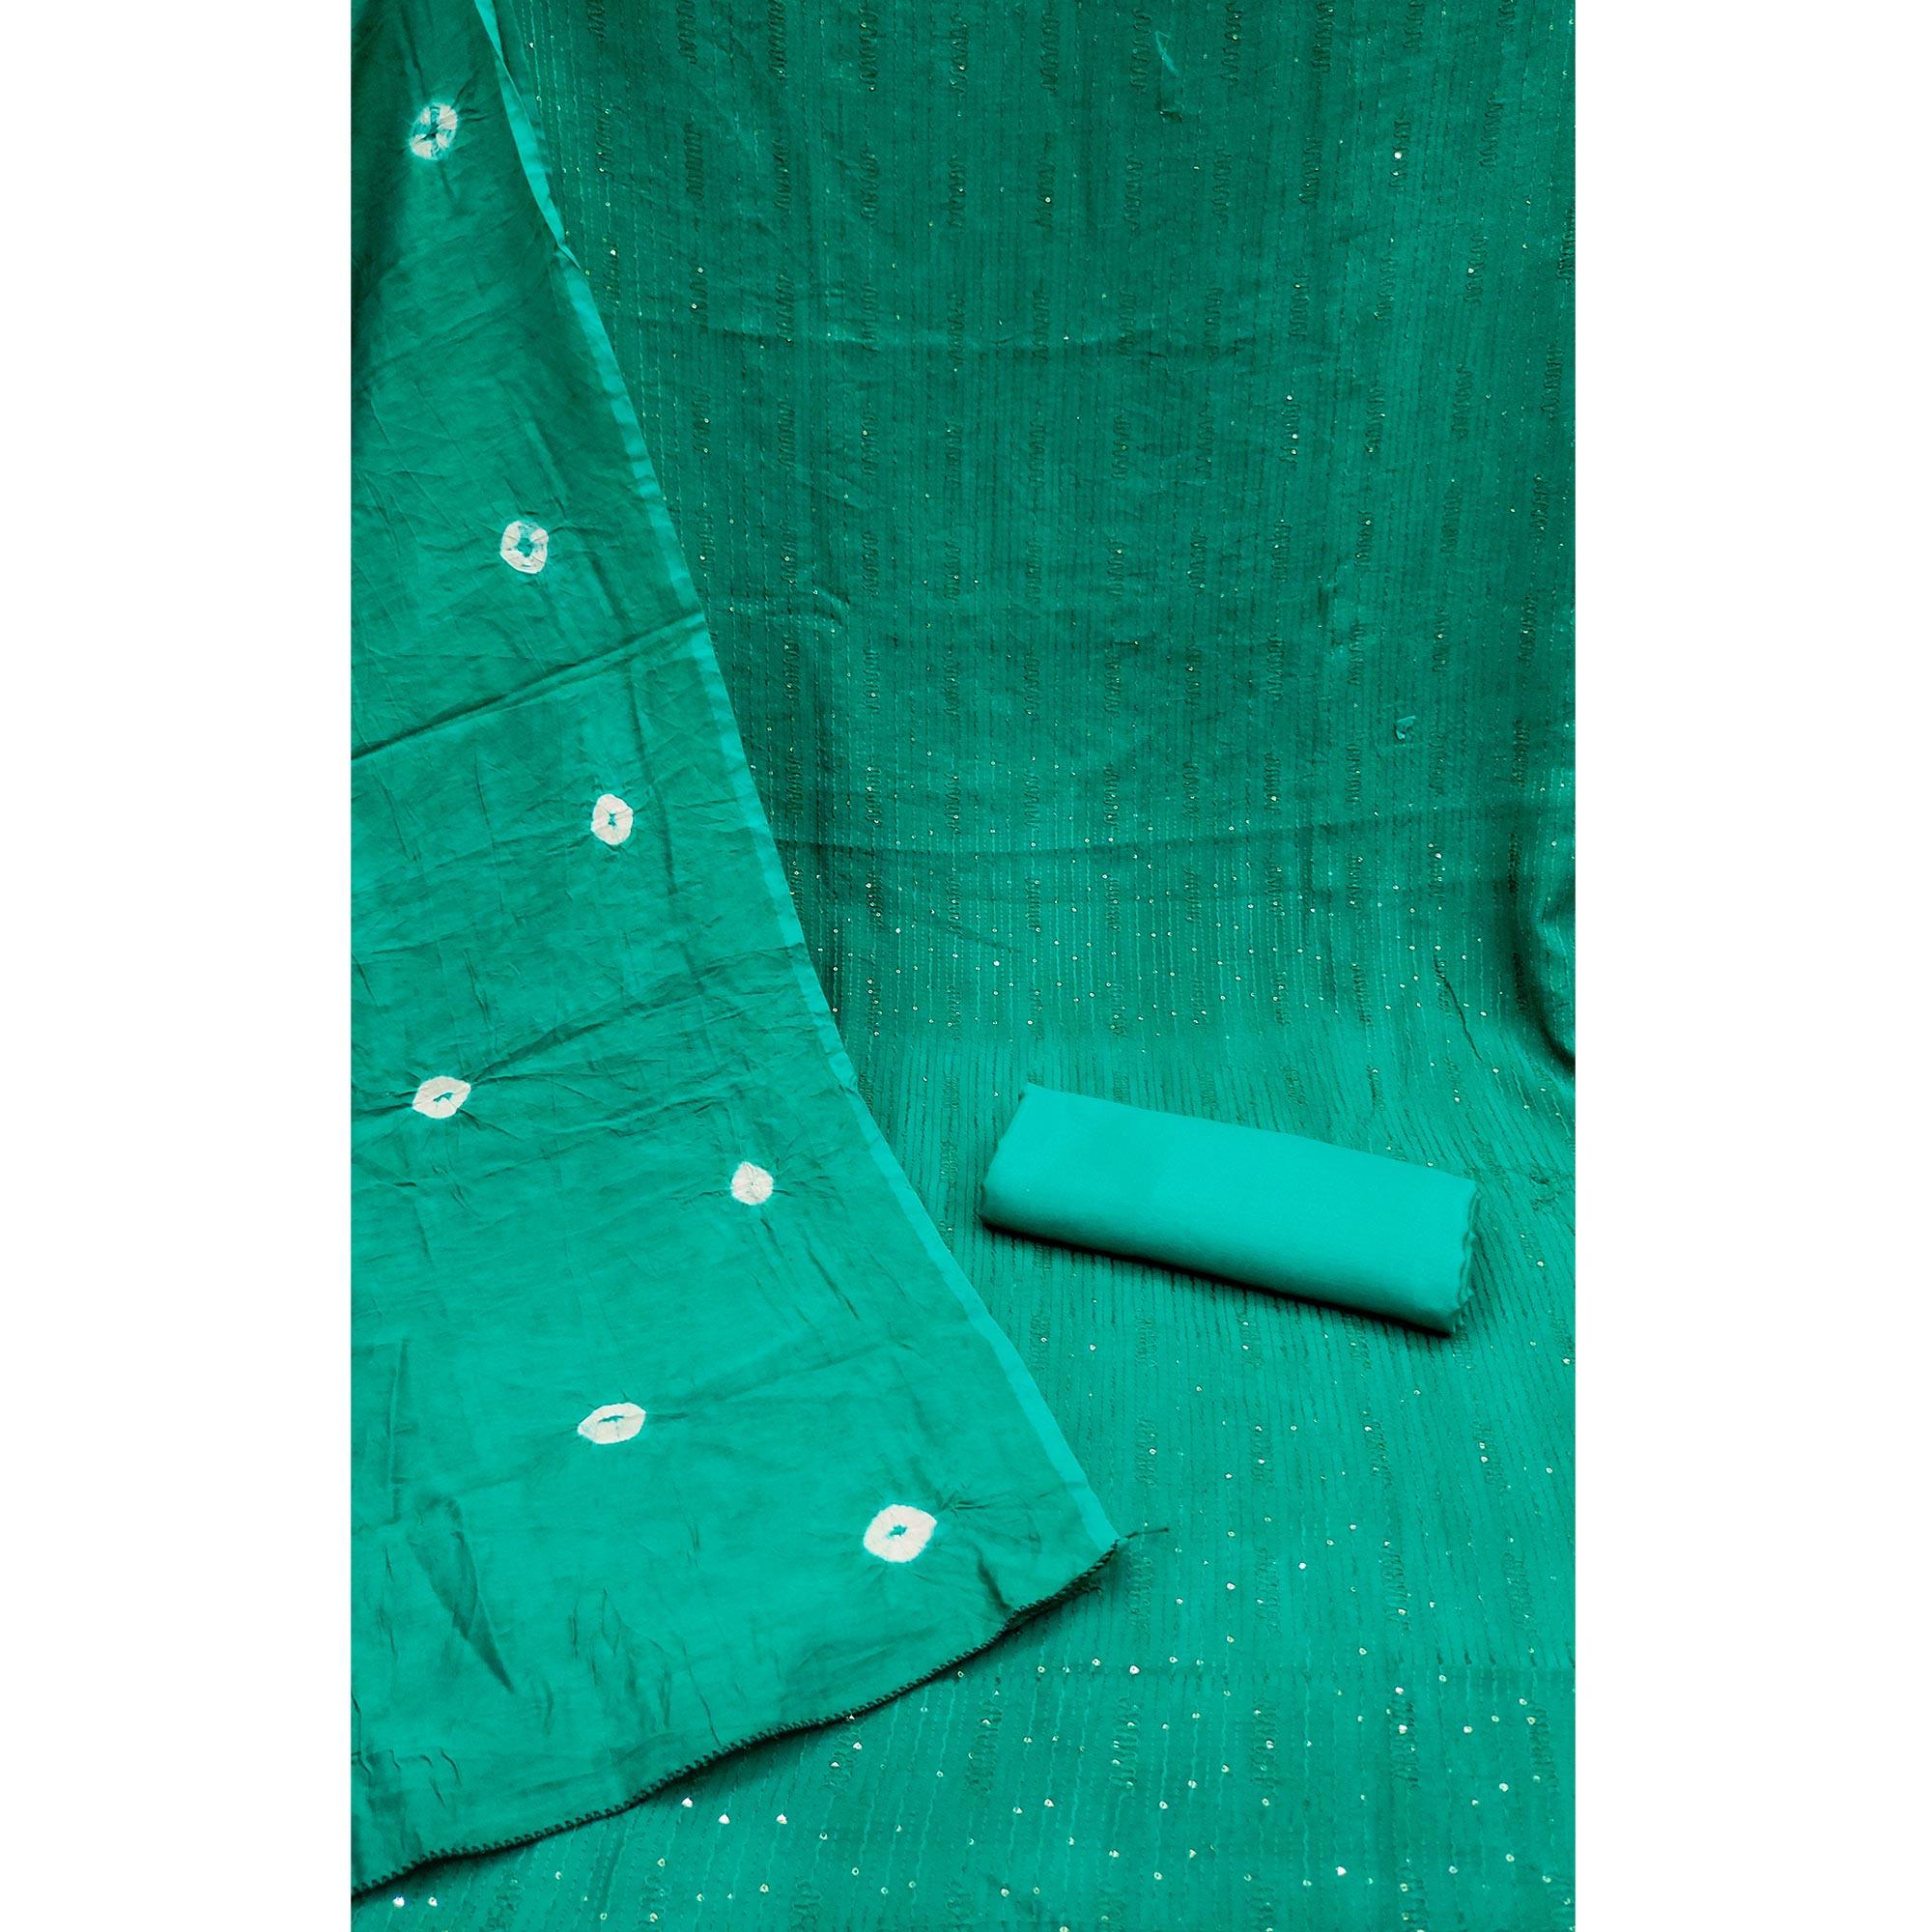 Rama Green Sequence Embroidered Chanderi Dress Material - Peachmode